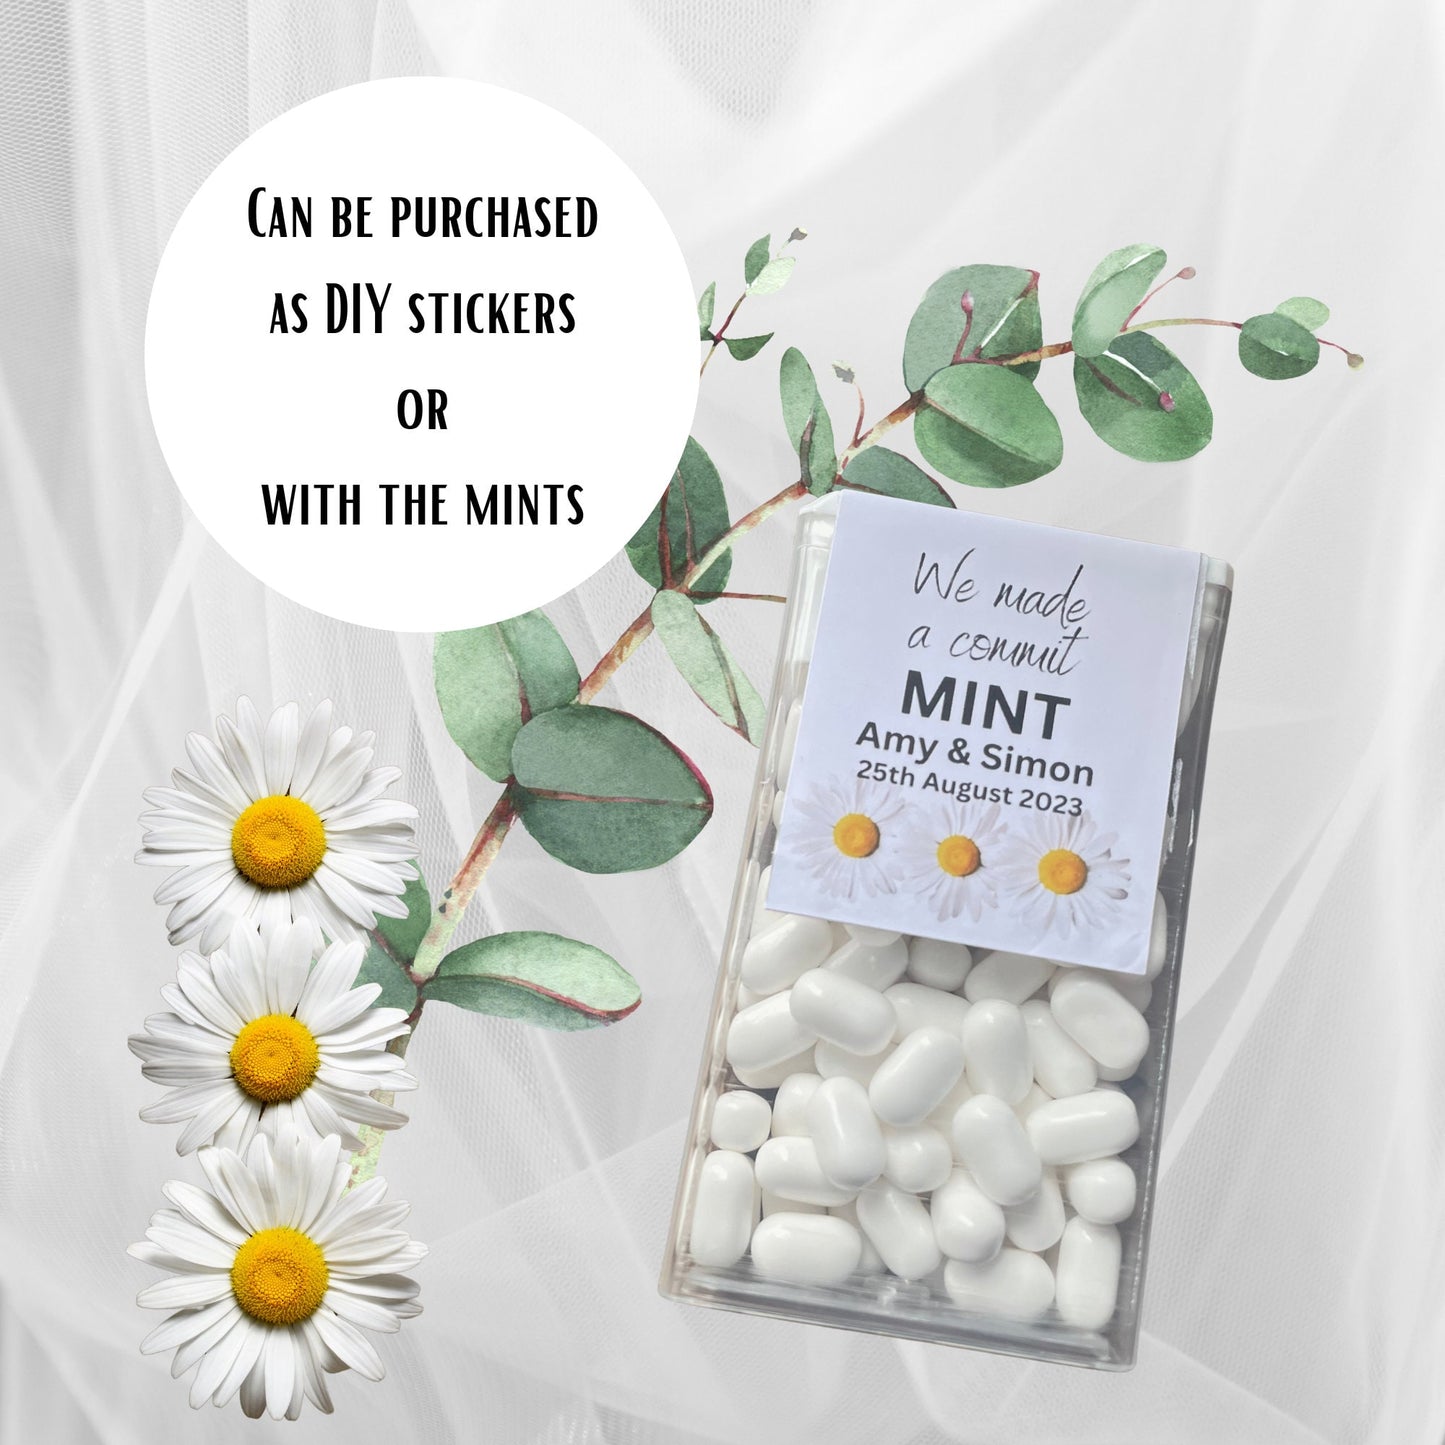 Personalised DIY "We Made a Commit-Mint" Tic Tacs Wedding Favour Stickers